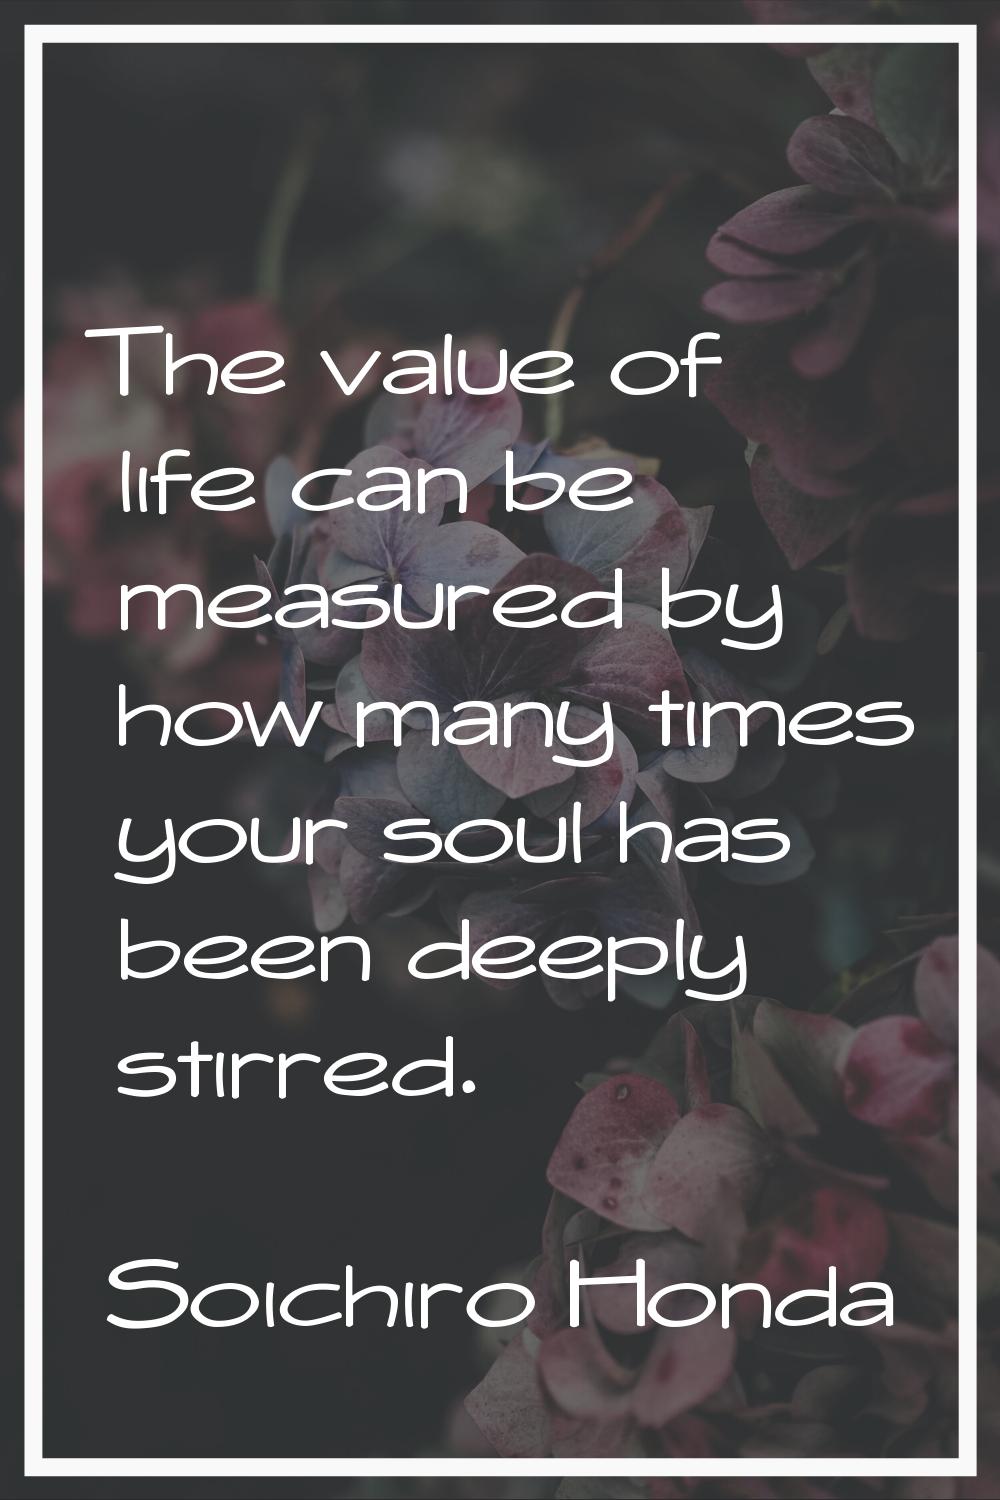 The value of life can be measured by how many times your soul has been deeply stirred.